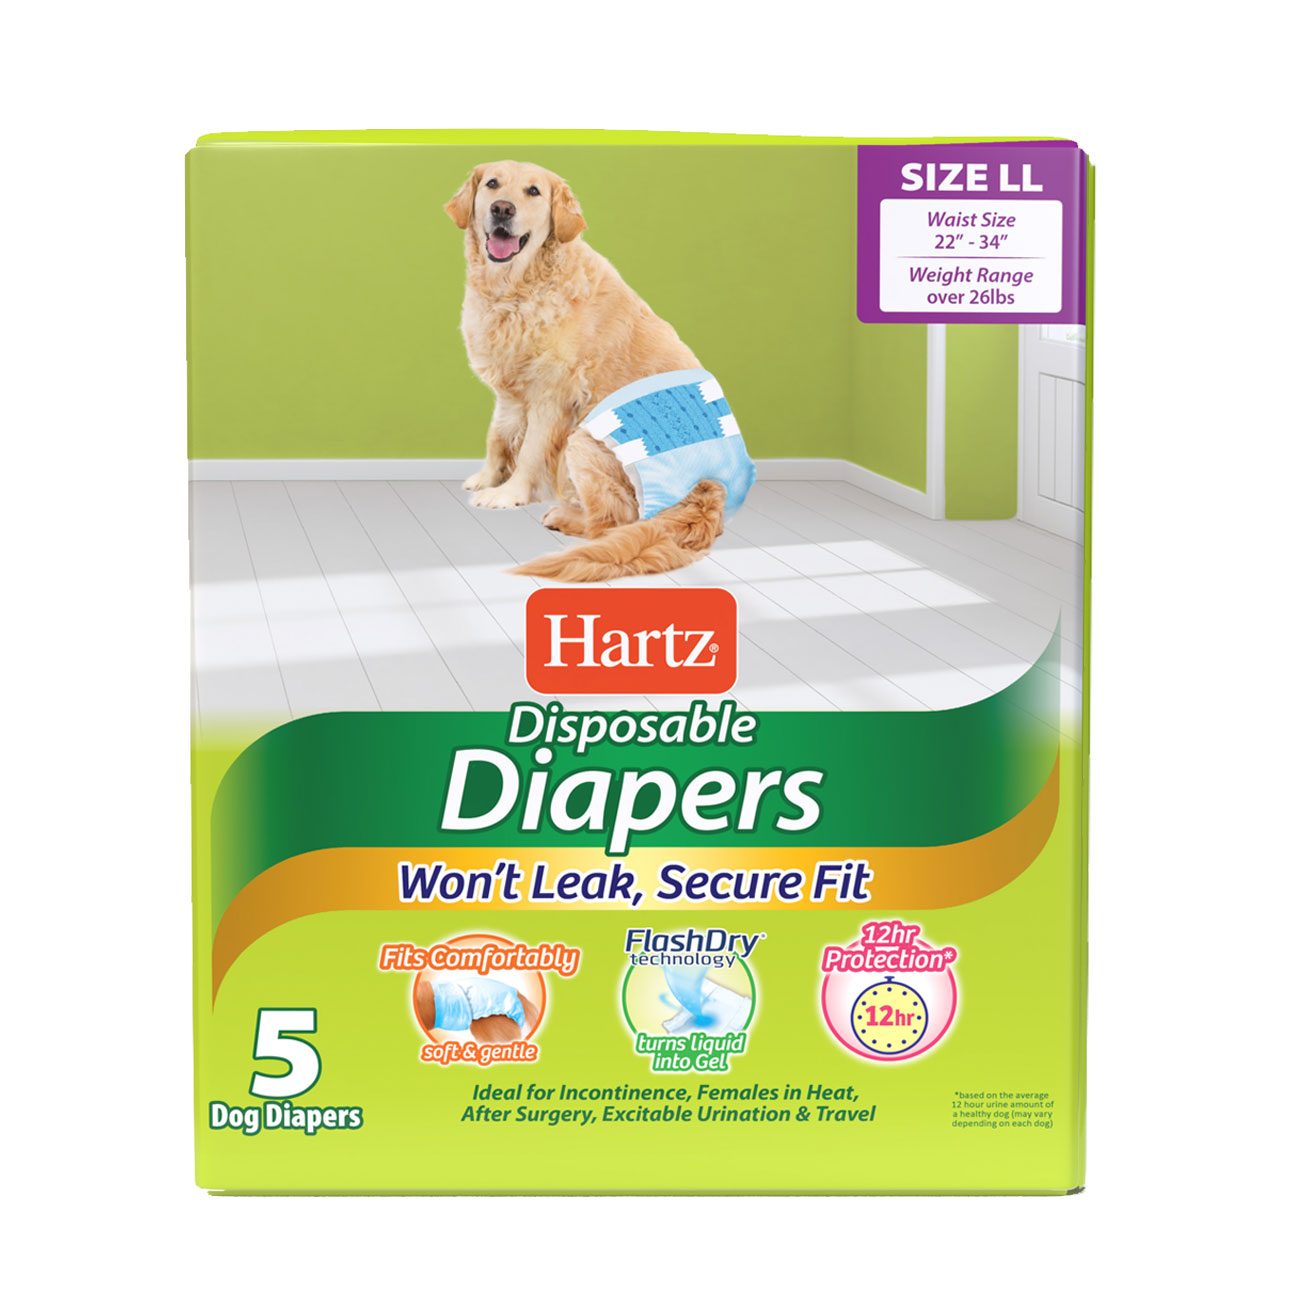 3270011244. Hartz disposable diapers. Front of package. Avoid unpleasant messes with Hartz disposable diapers and Hartz disposable male wraps.